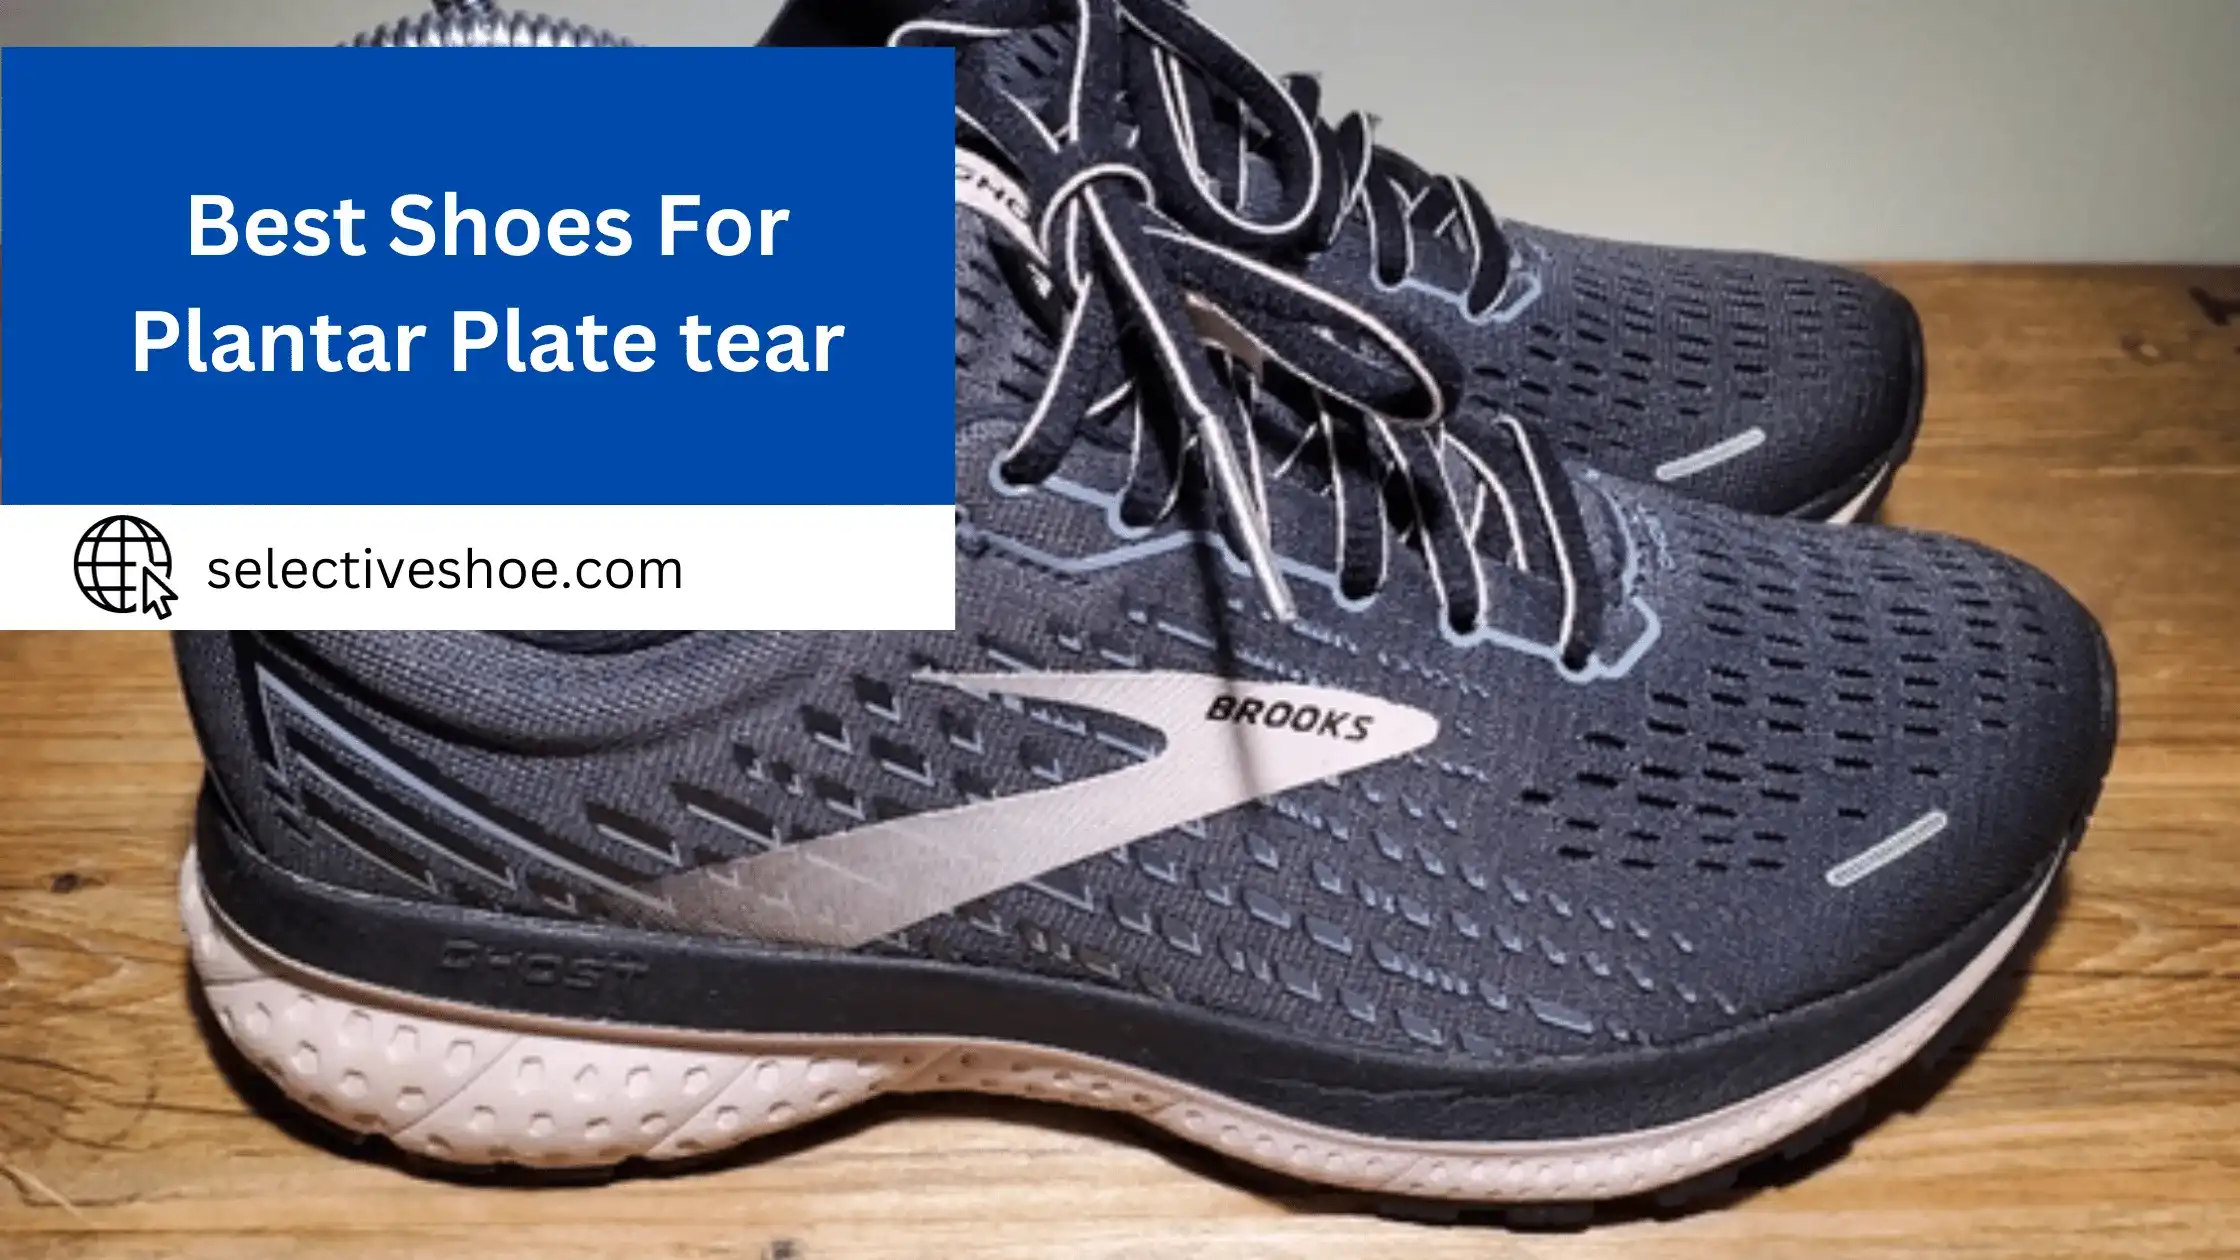 Revealing Top 10 Best Shoes For Plantar Plate tear